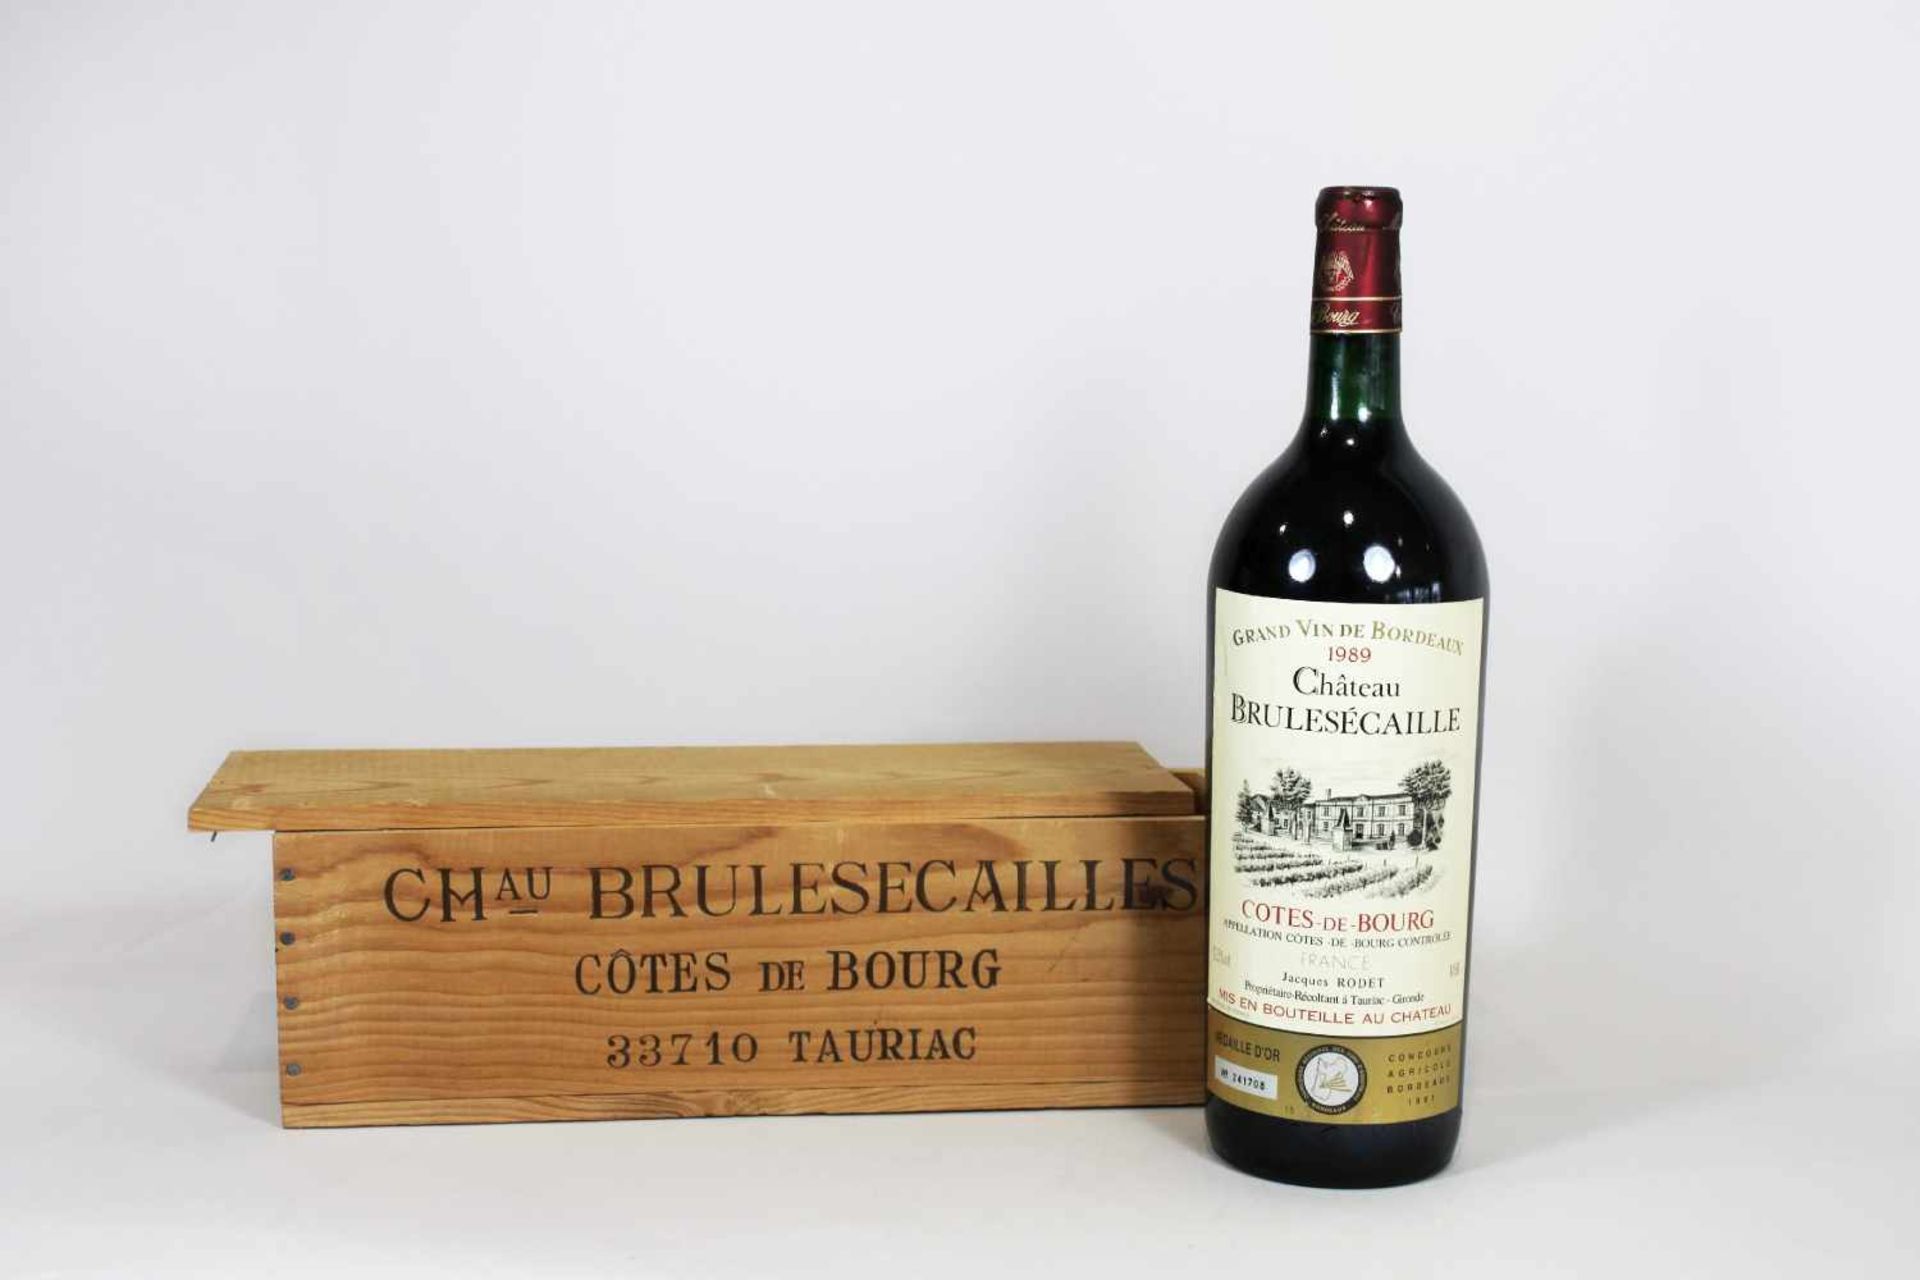 Flasche Rotwein in Holzkiste, Chau Brulesecailles Cotes de Bourg 33710 Tauriac, 1989.